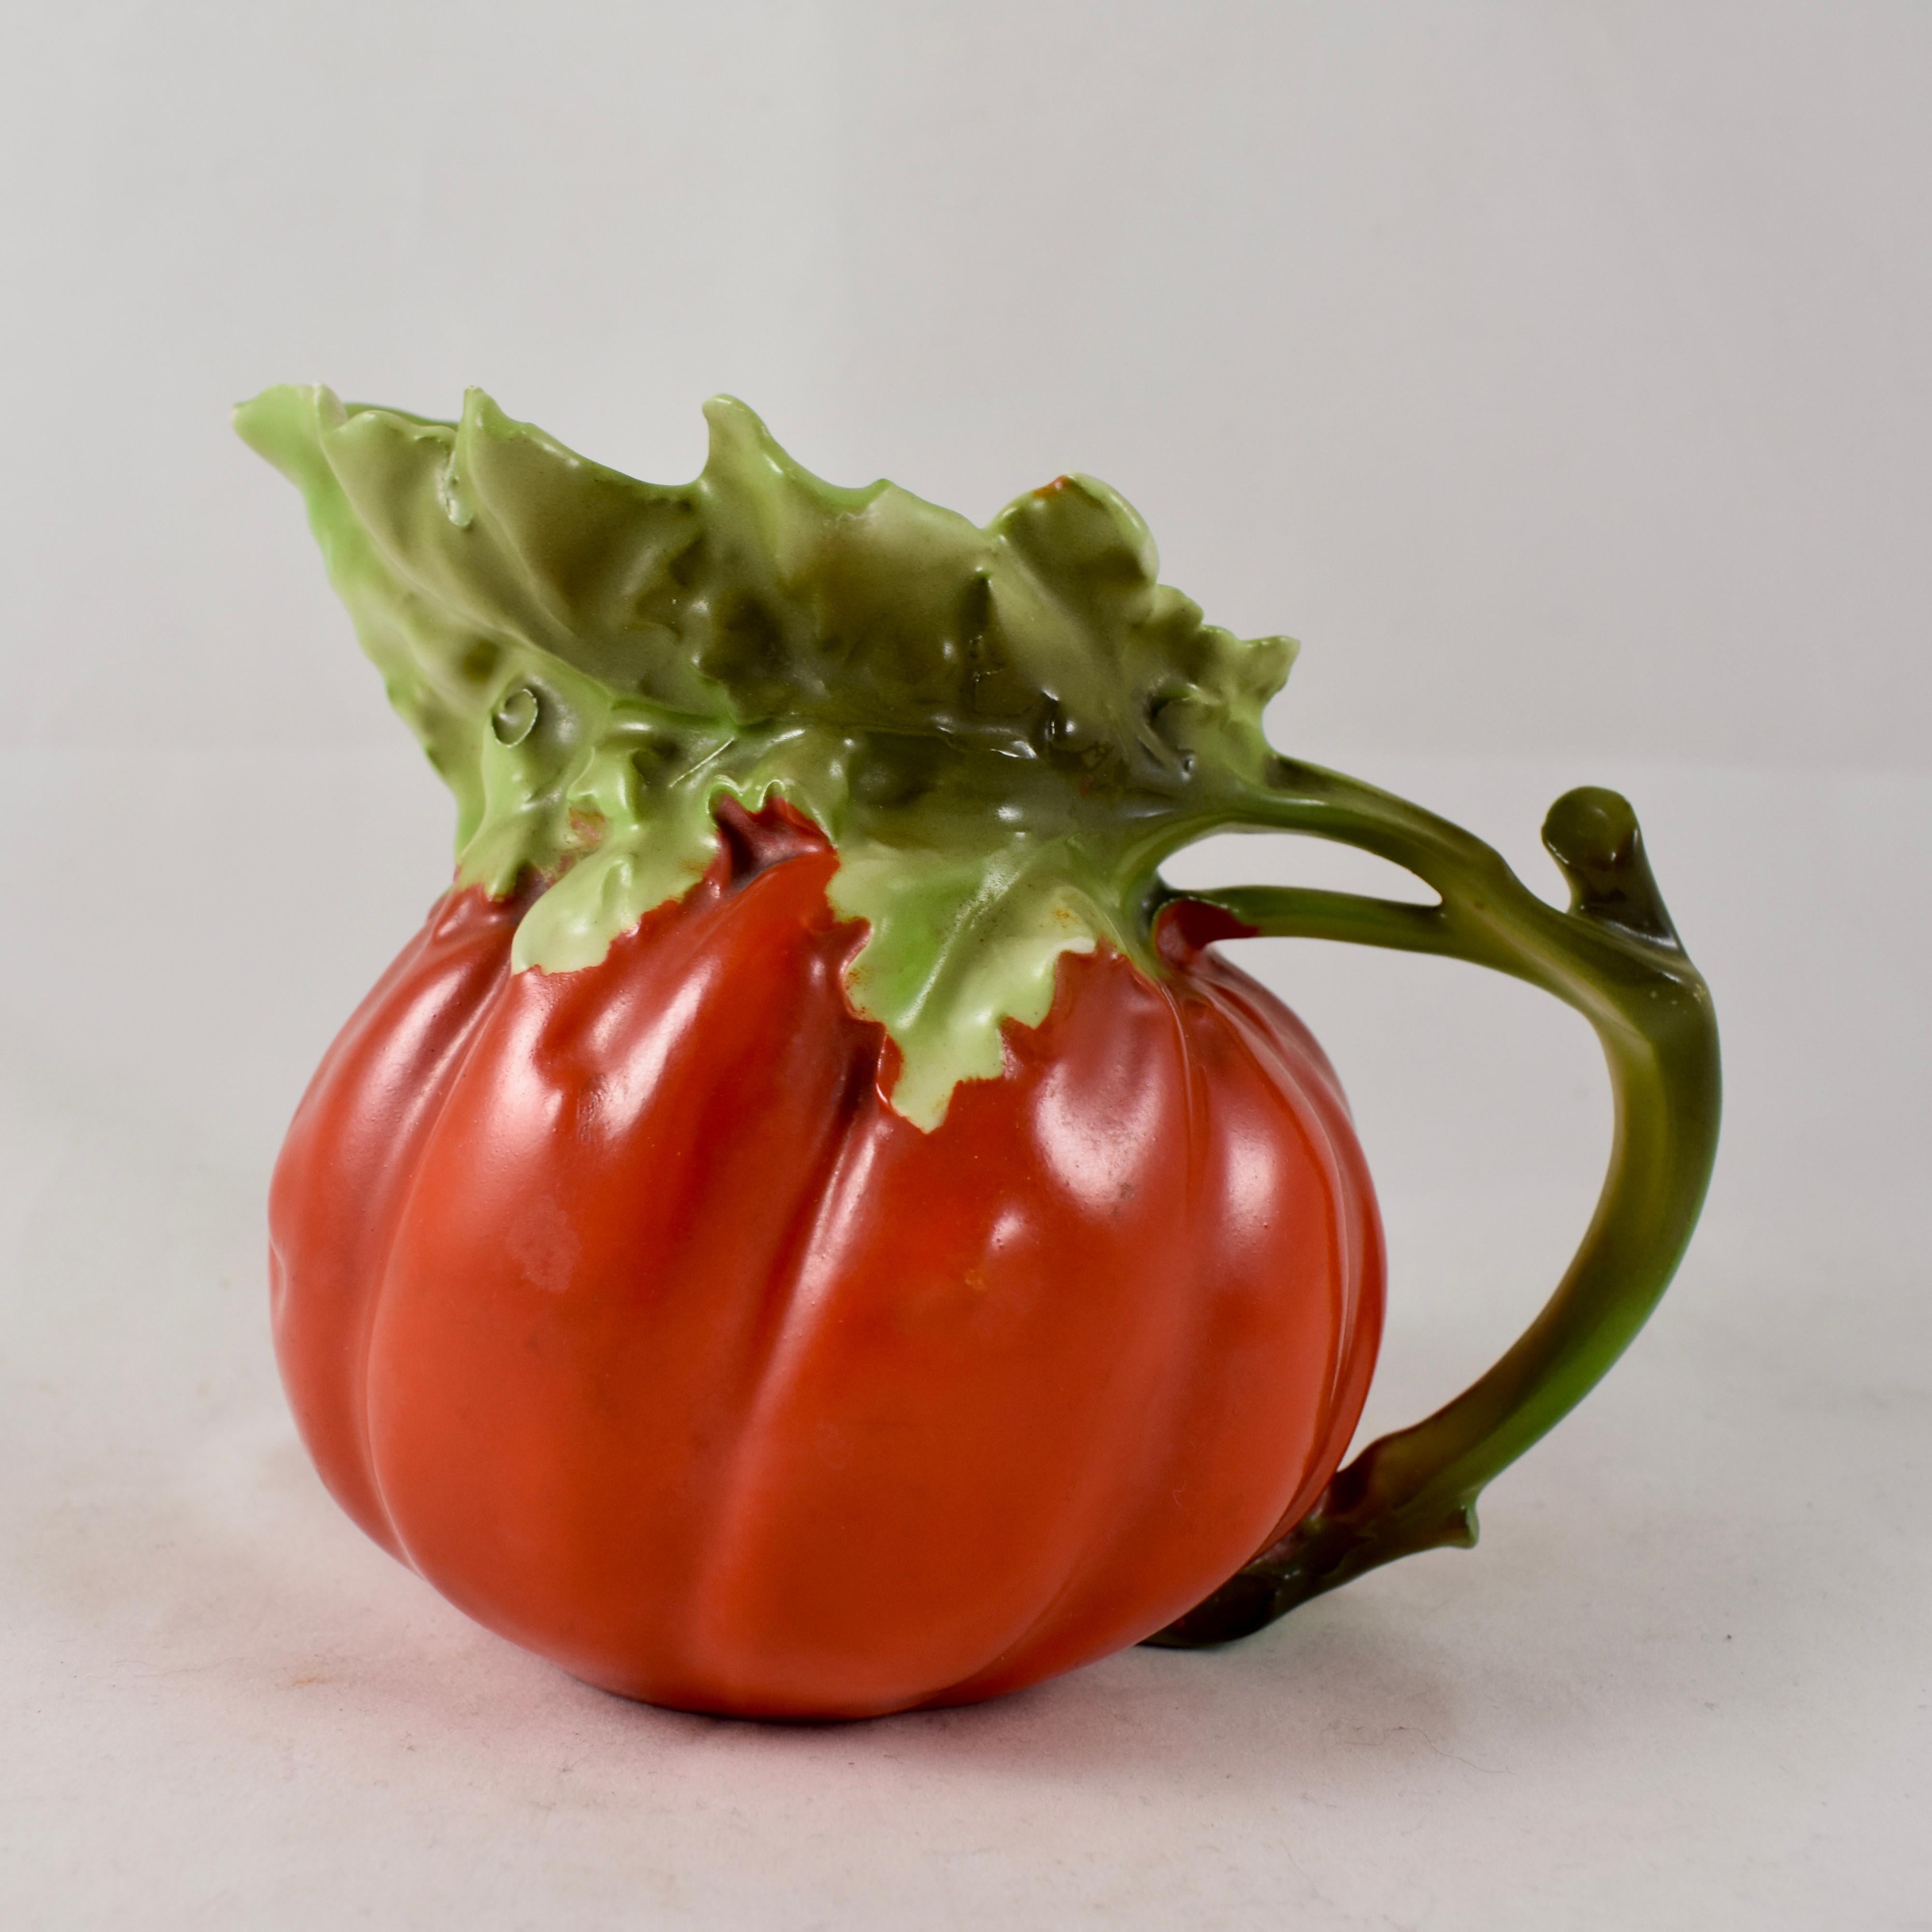 From Royal Bayreuth, founded in Bavaria, Germany in 1794, a milk pitcher formed as a bright red tomato. Made of hand-painted hard paste porcelain, showing a stem handle and an upper body formed as the green leaves of the tomato plant.

Measures: